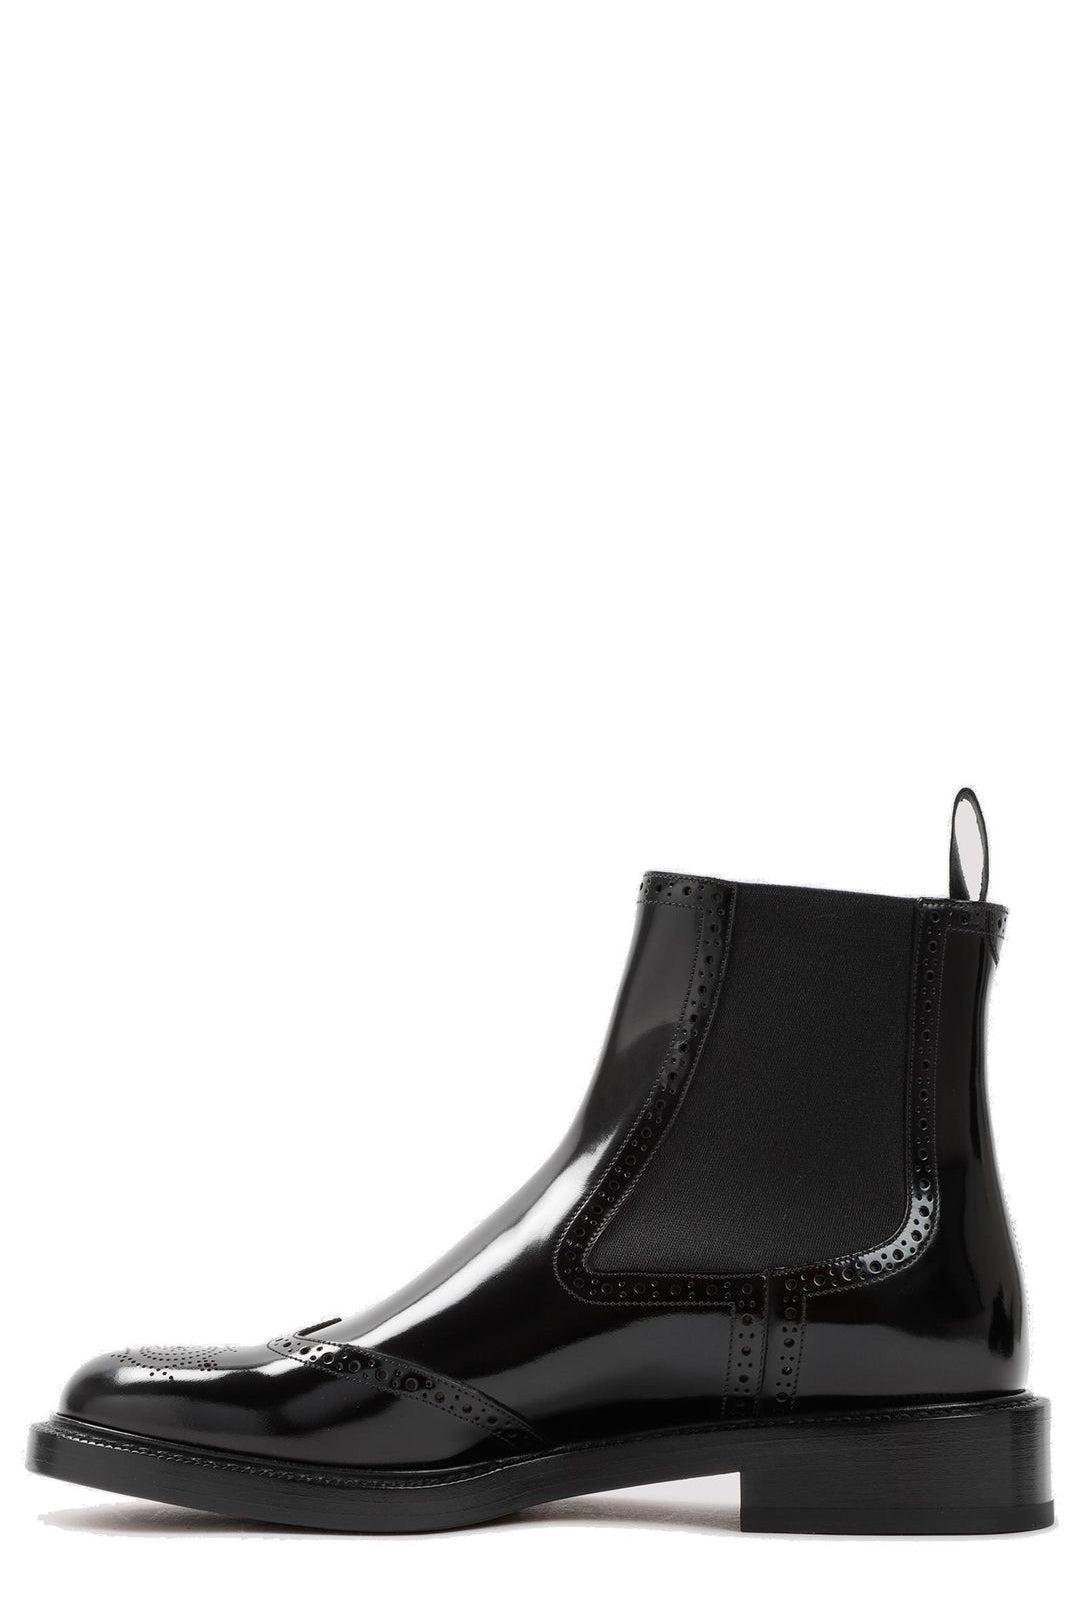 Dior Leather Evidence Chelsea Boots in Black for Men - Lyst